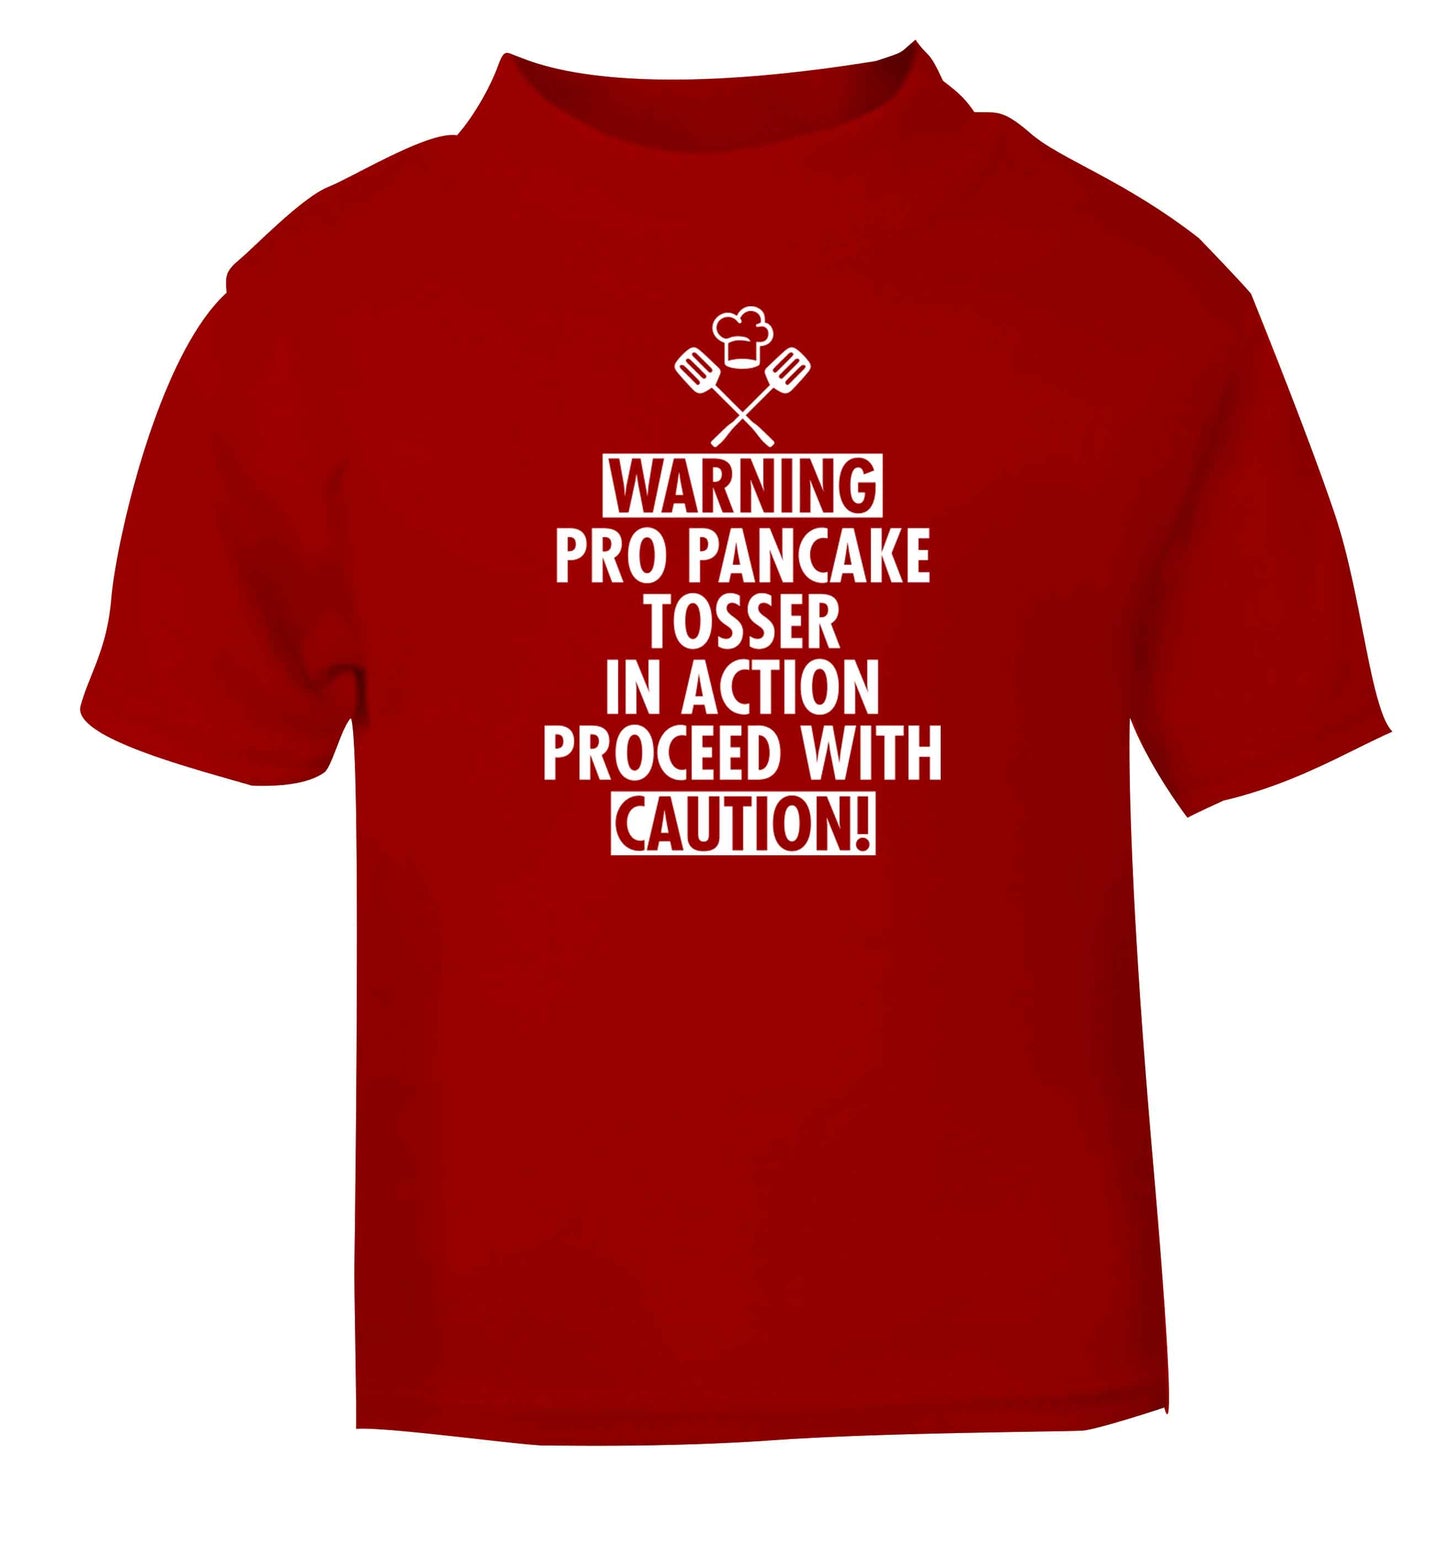 Warning pro pancake tosser in action proceed with caution red baby toddler Tshirt 2 Years